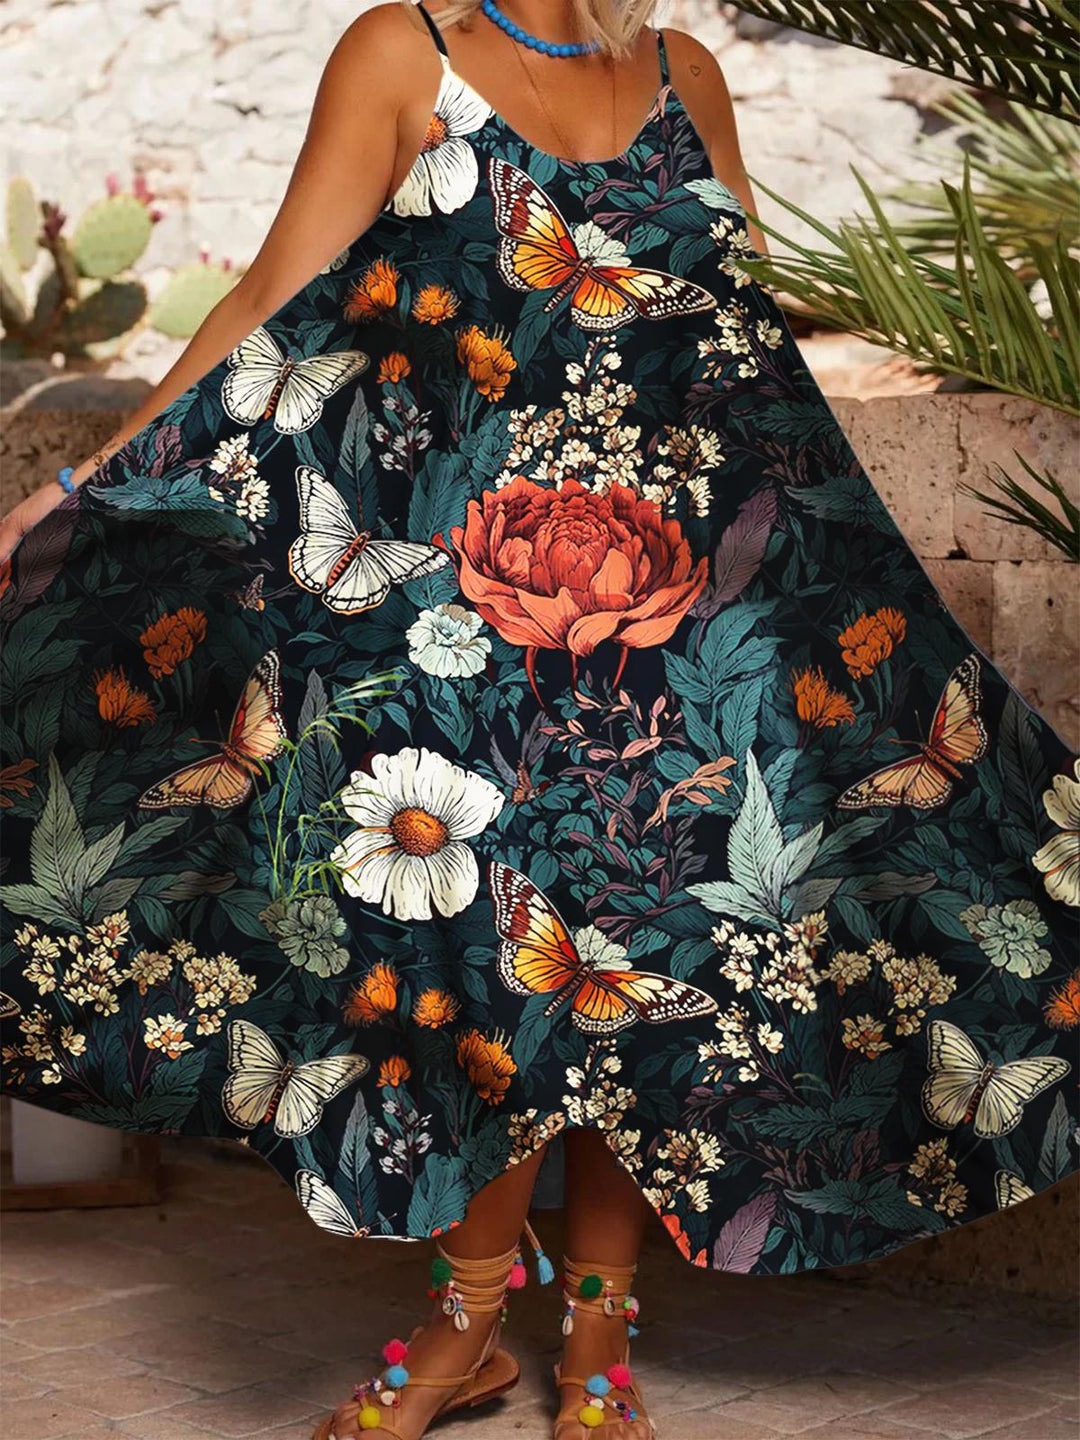 Butterfly Floral Print Casual Spaghetti Strap Dress